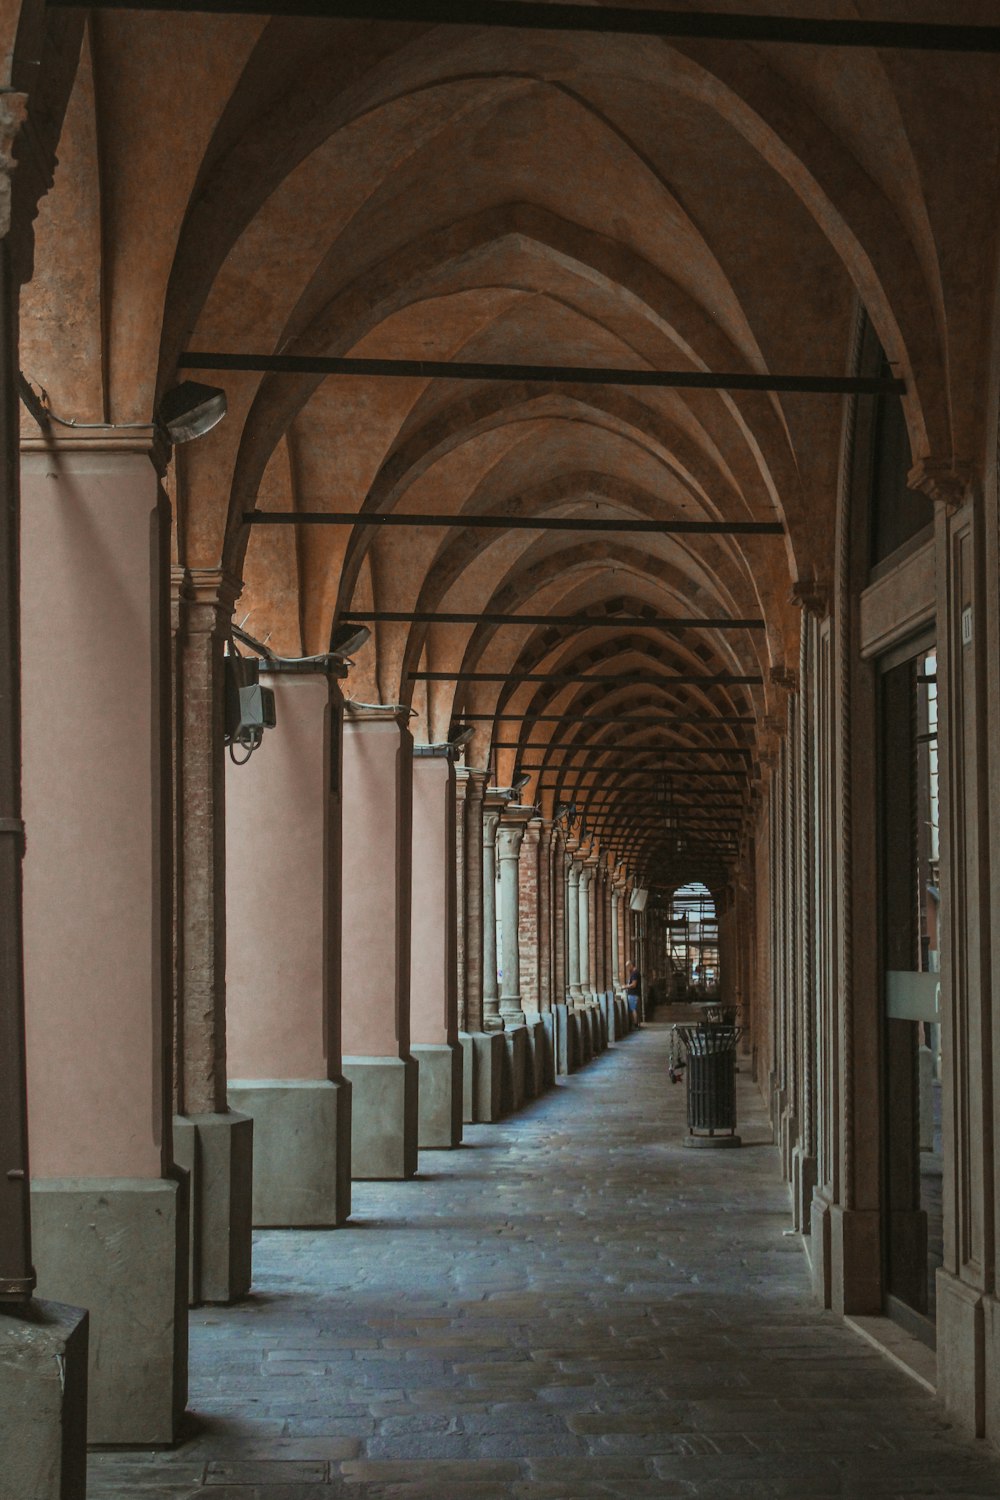 a walkway with a large arched ceiling